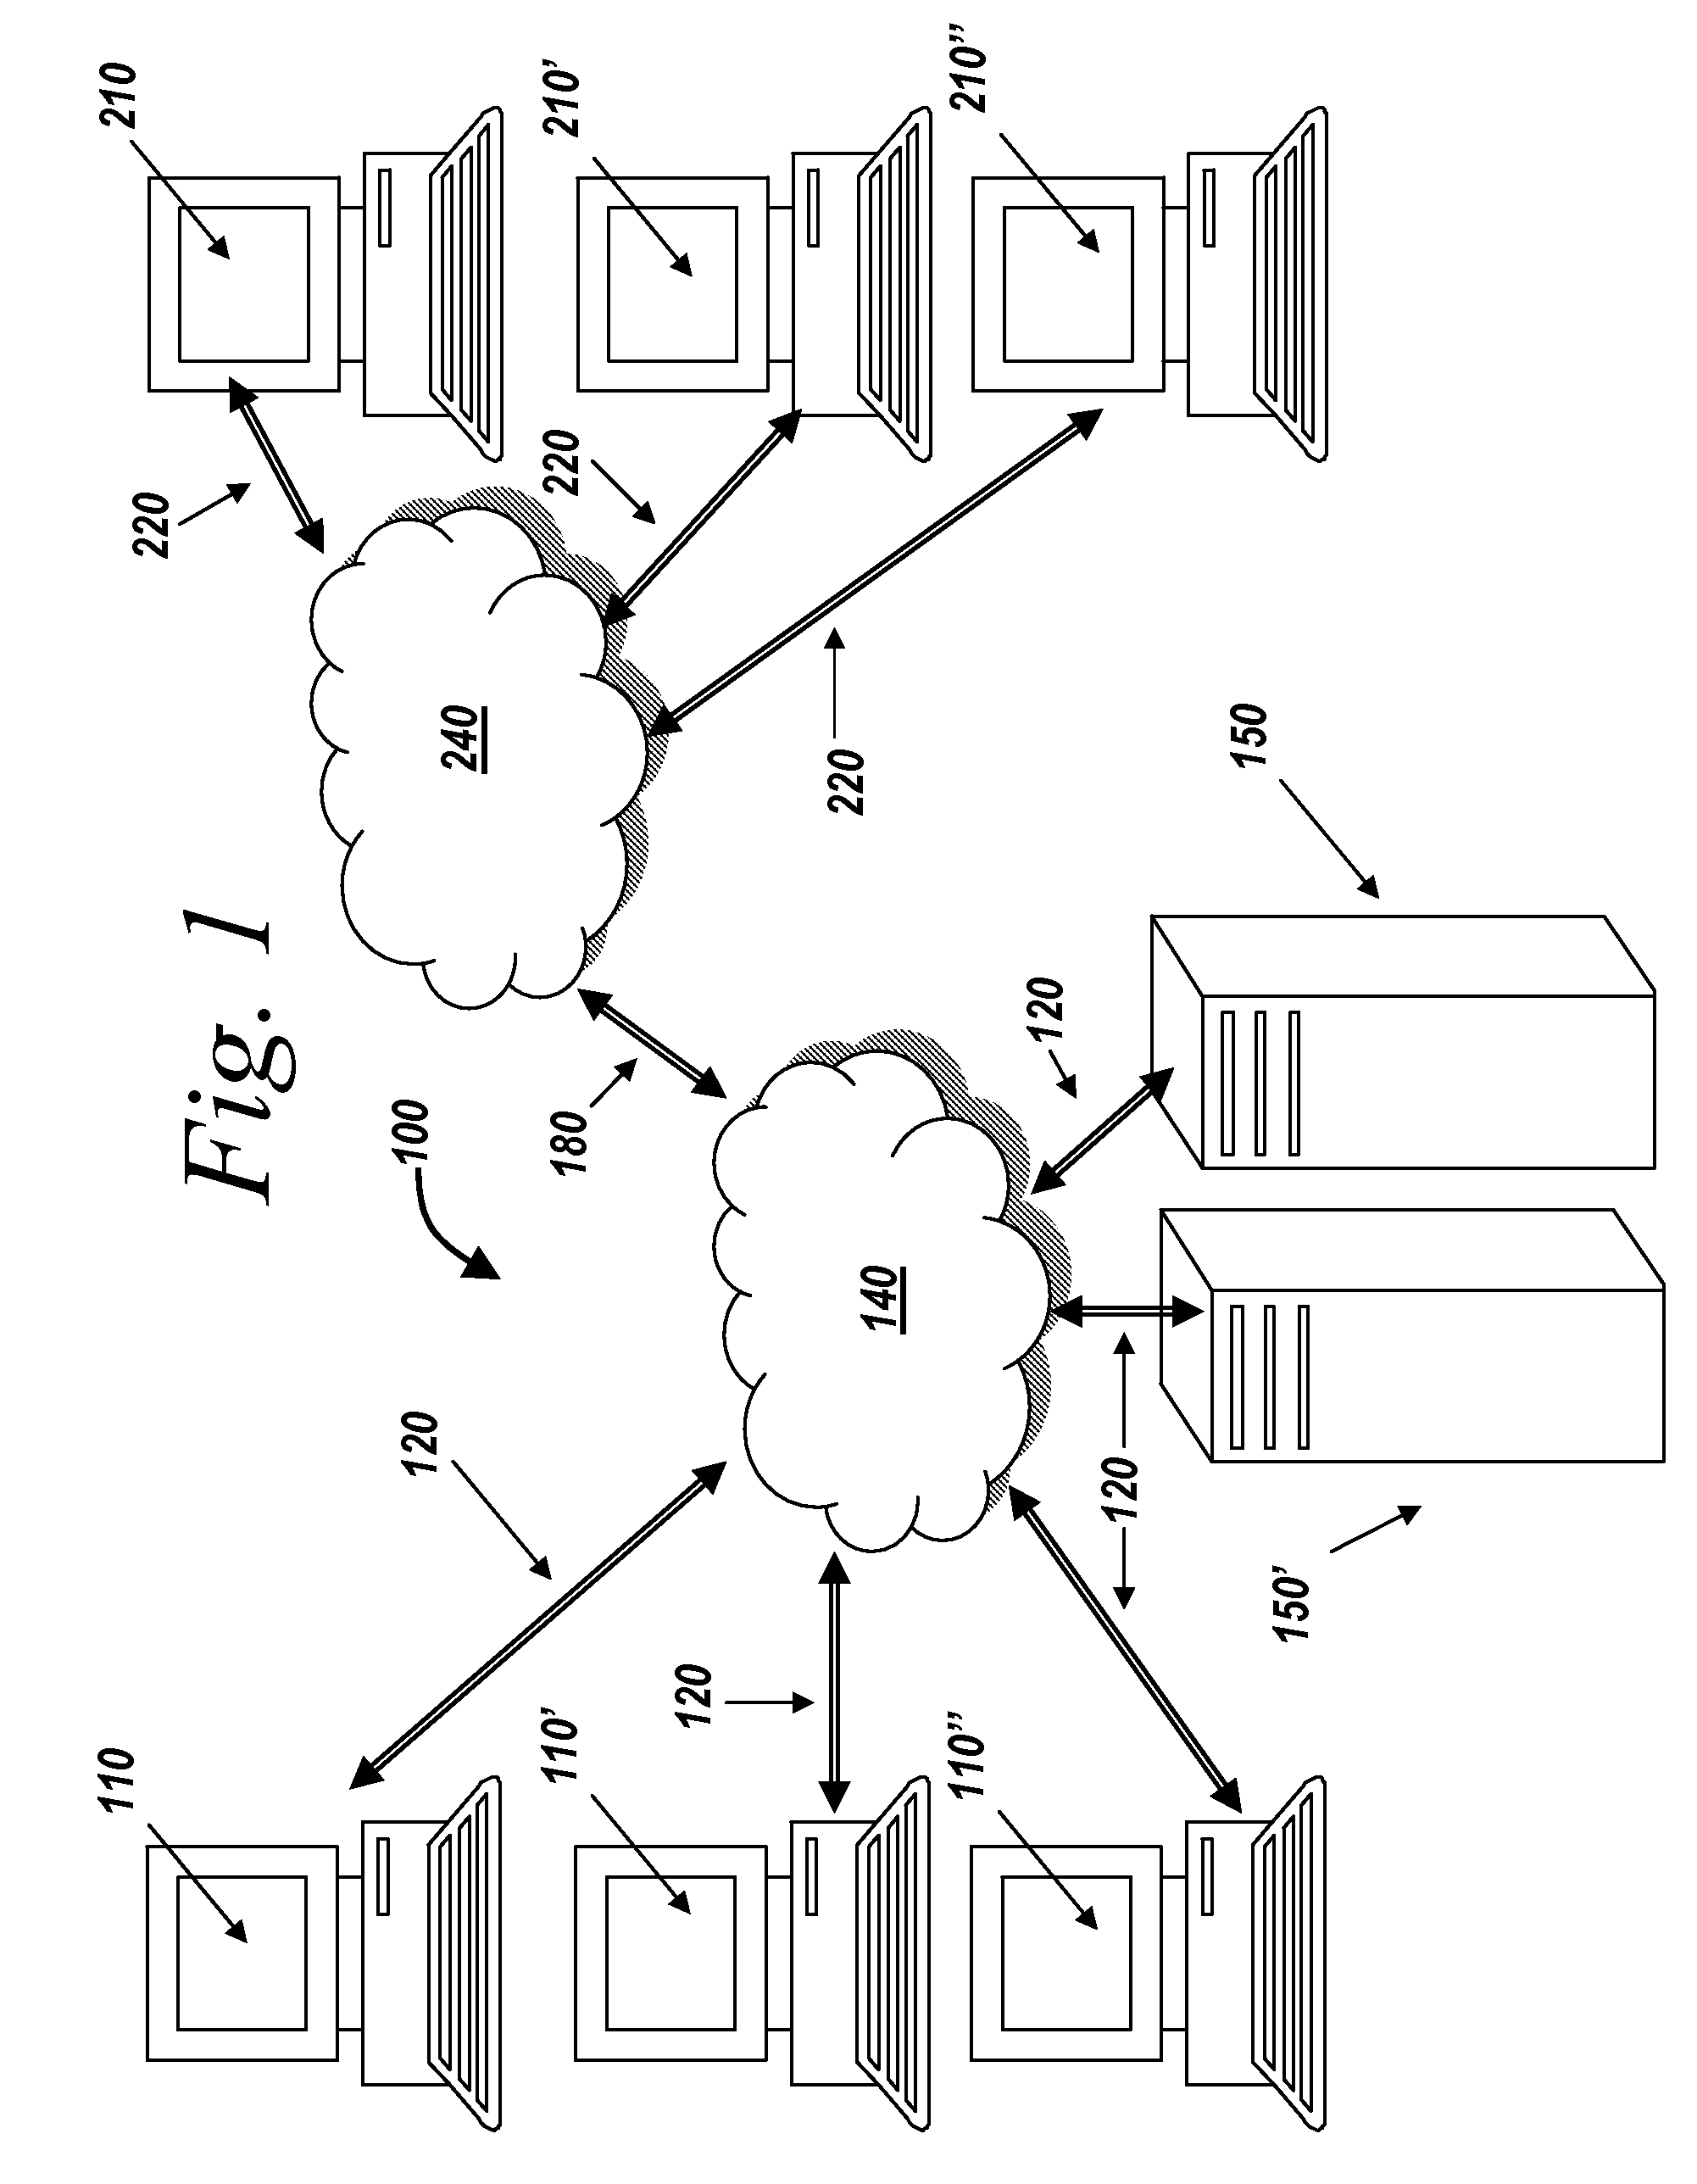 Systems and Methods for Filtering File System Input and Output